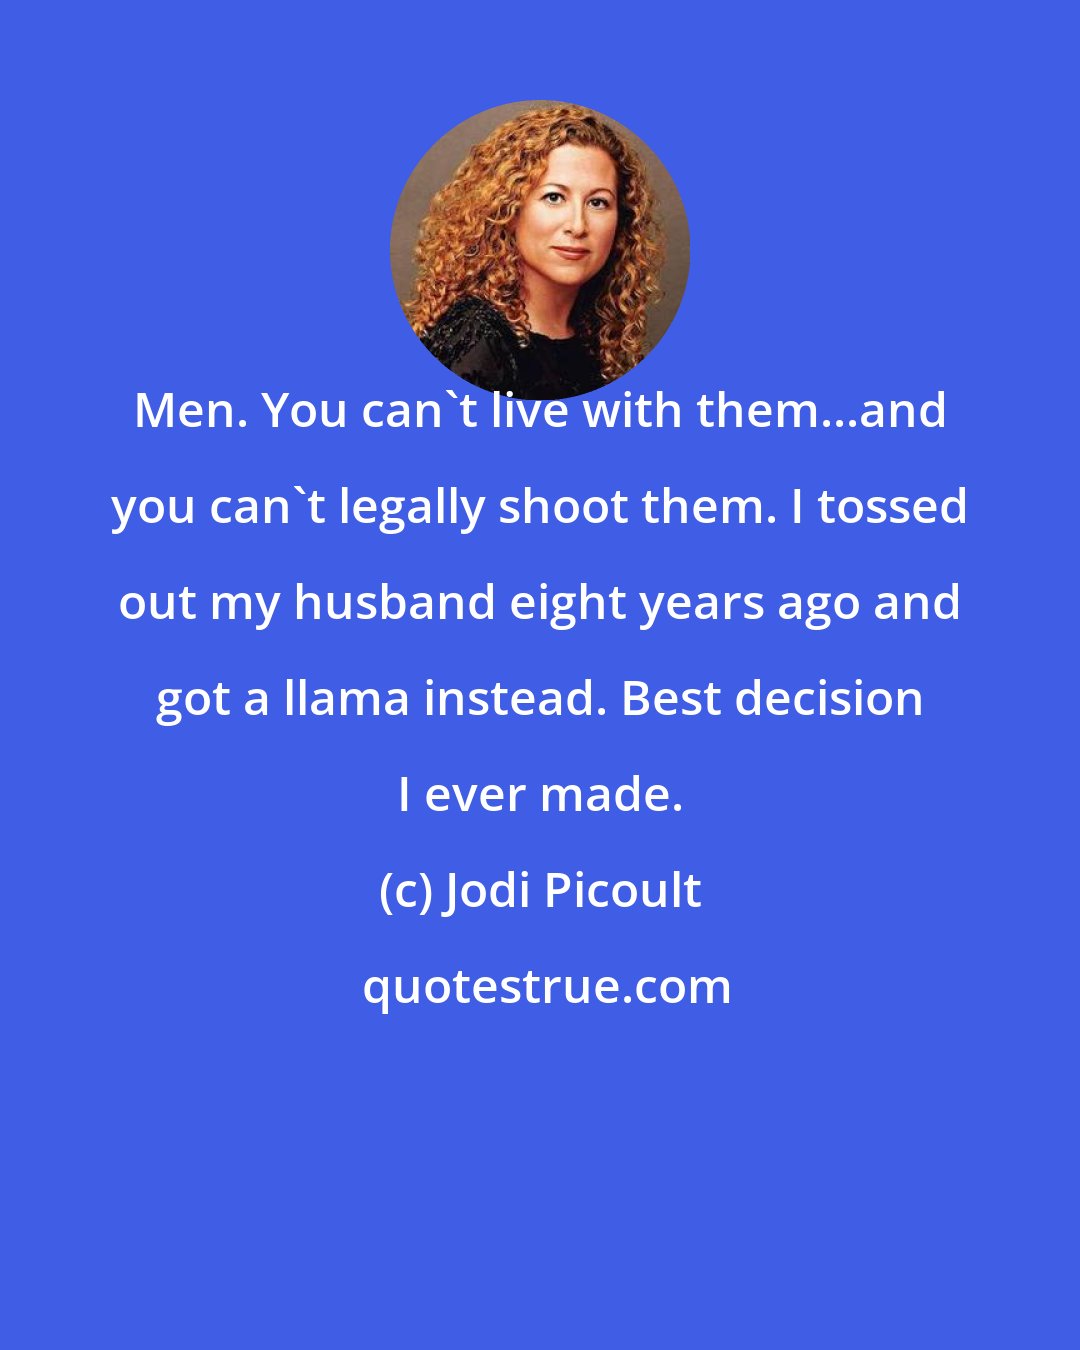 Jodi Picoult: Men. You can't live with them...and you can't legally shoot them. I tossed out my husband eight years ago and got a llama instead. Best decision I ever made.